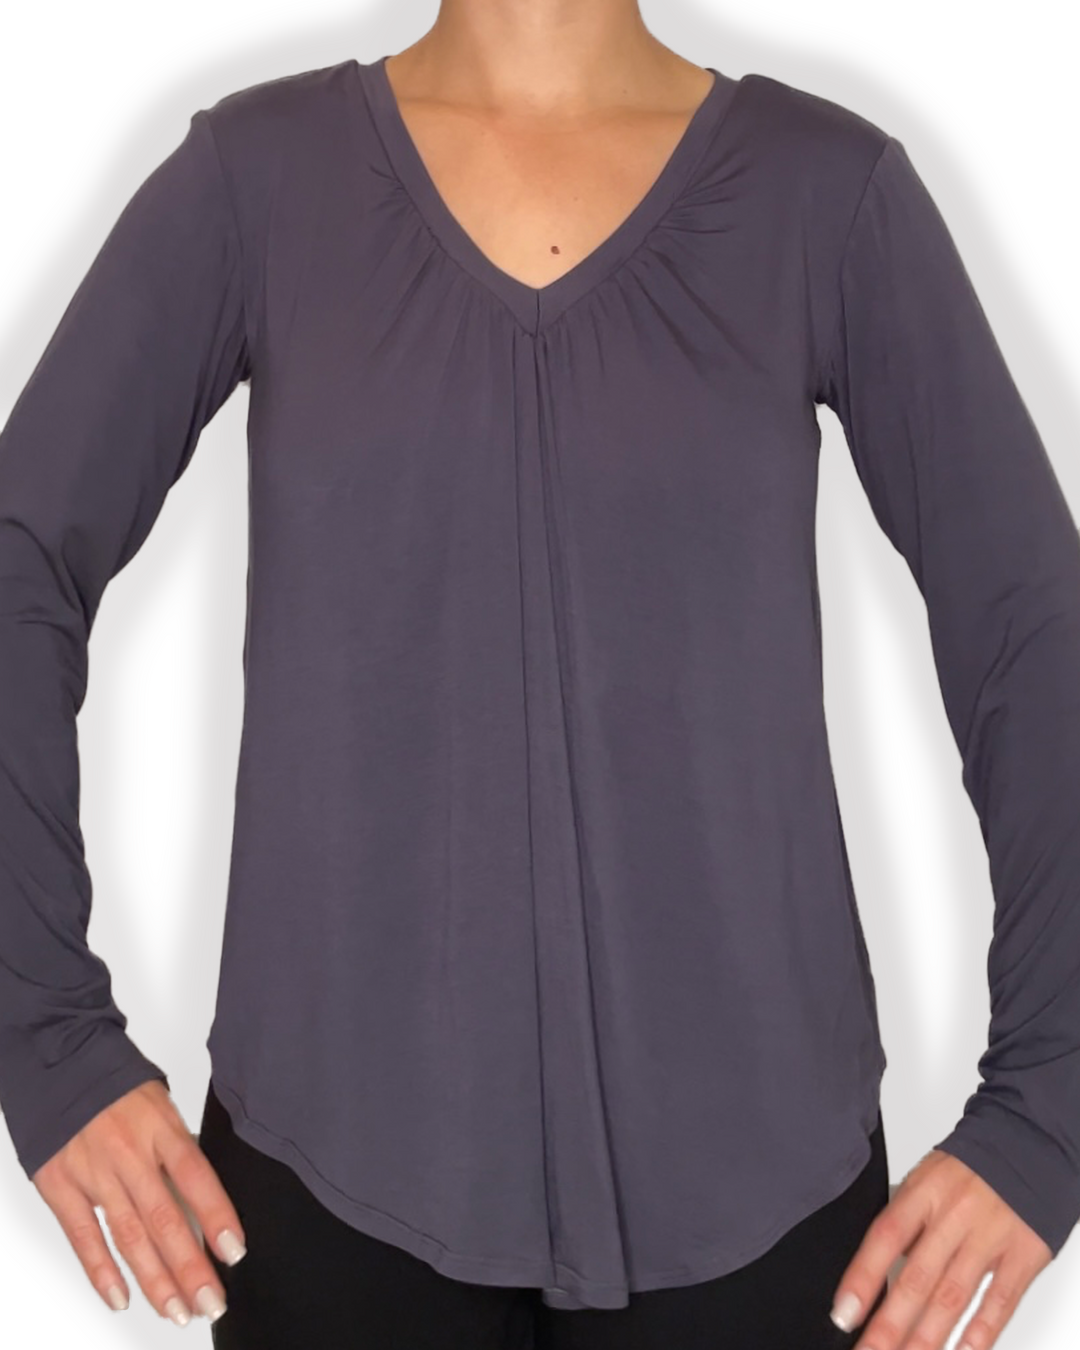 Collection DARCI of Bamboo Long Sleeve Tops in dusty navy color front view